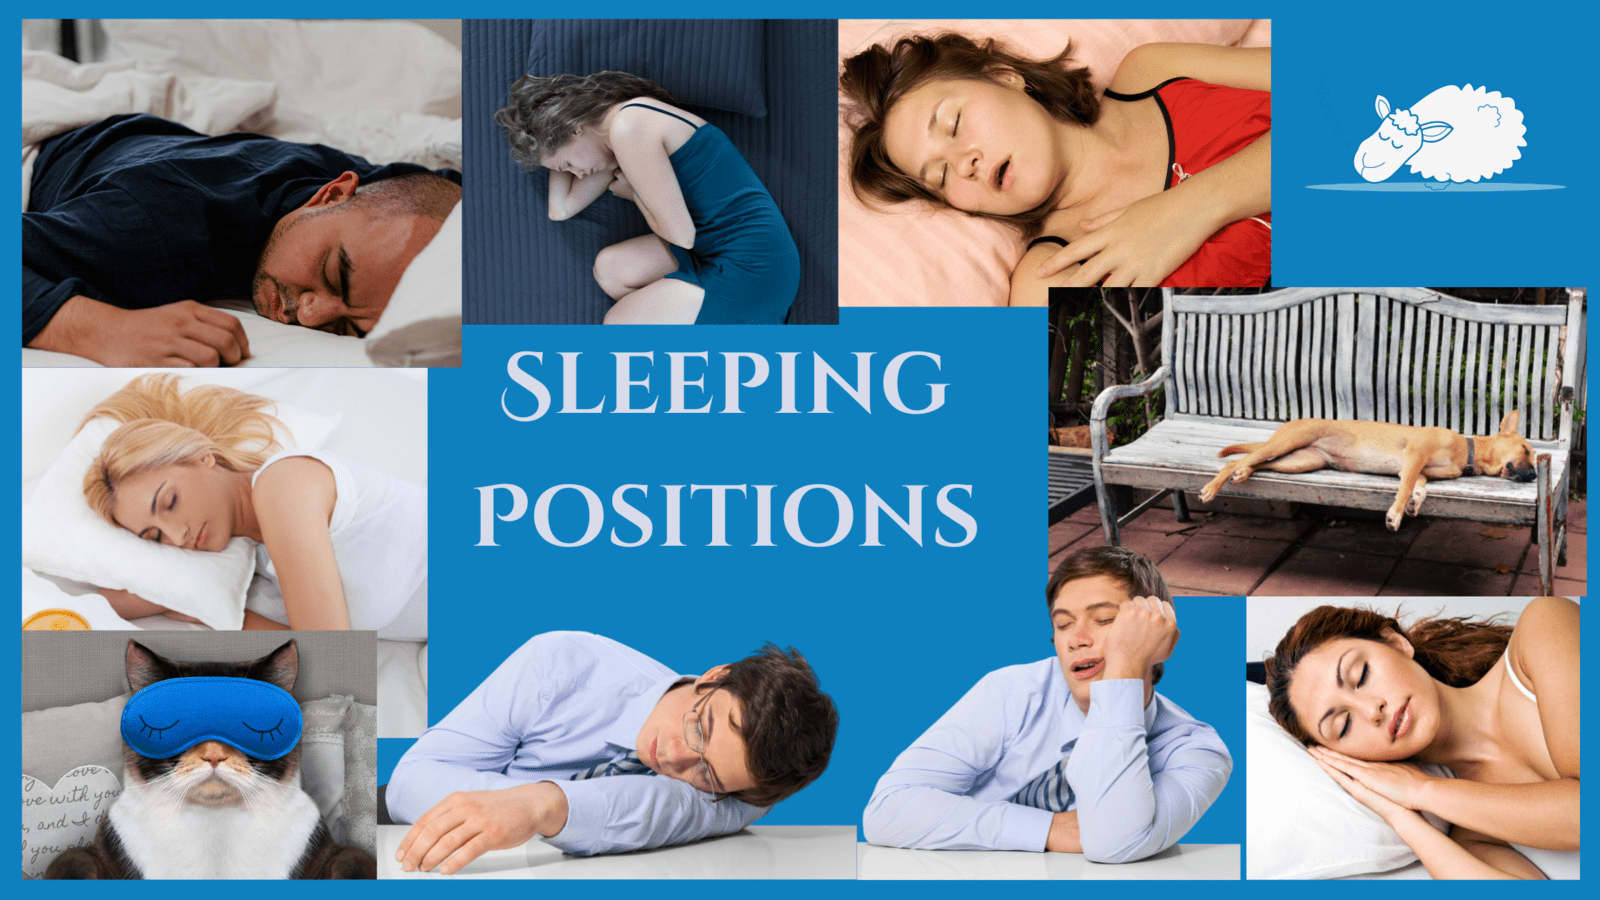 Image shows different ways of sleeping including - side sleeping, curling up in a foetal position, front sleeping, back sleeping and sleep sitting upright